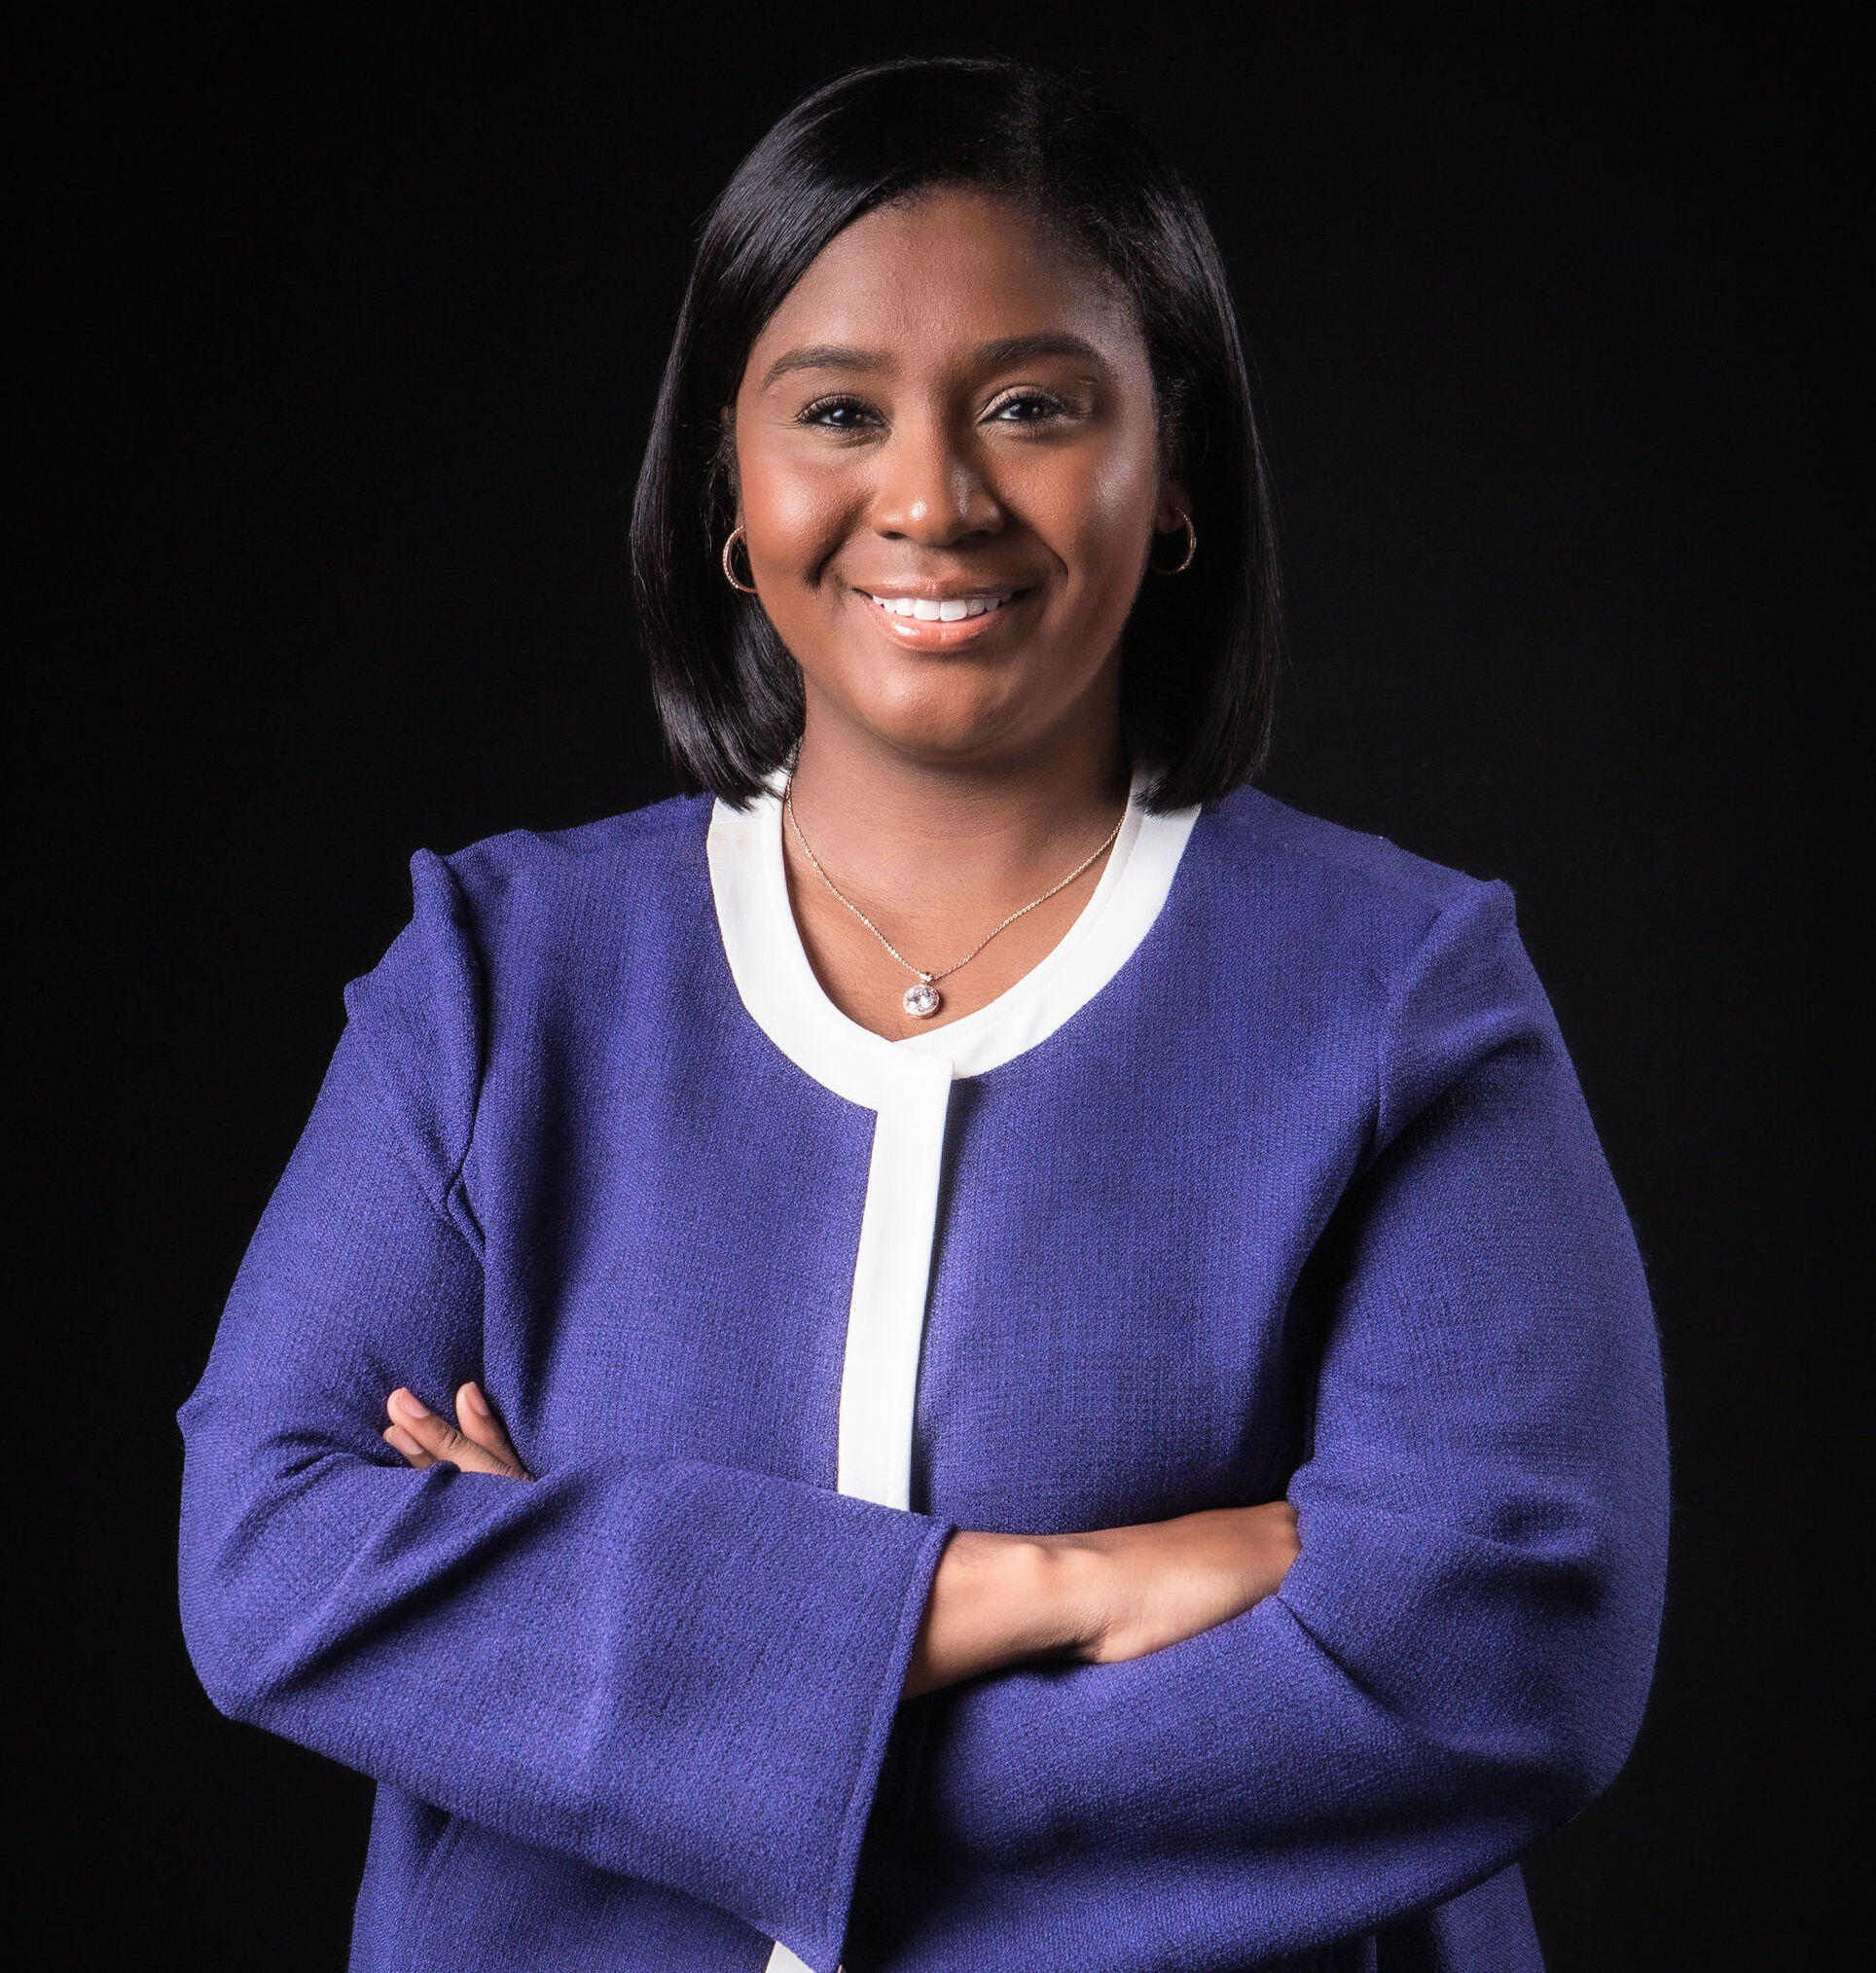 Communications veteran Gabrielle (Farrell) Mondestin has been appointed as the MBTA’s Chief Communications Officer.